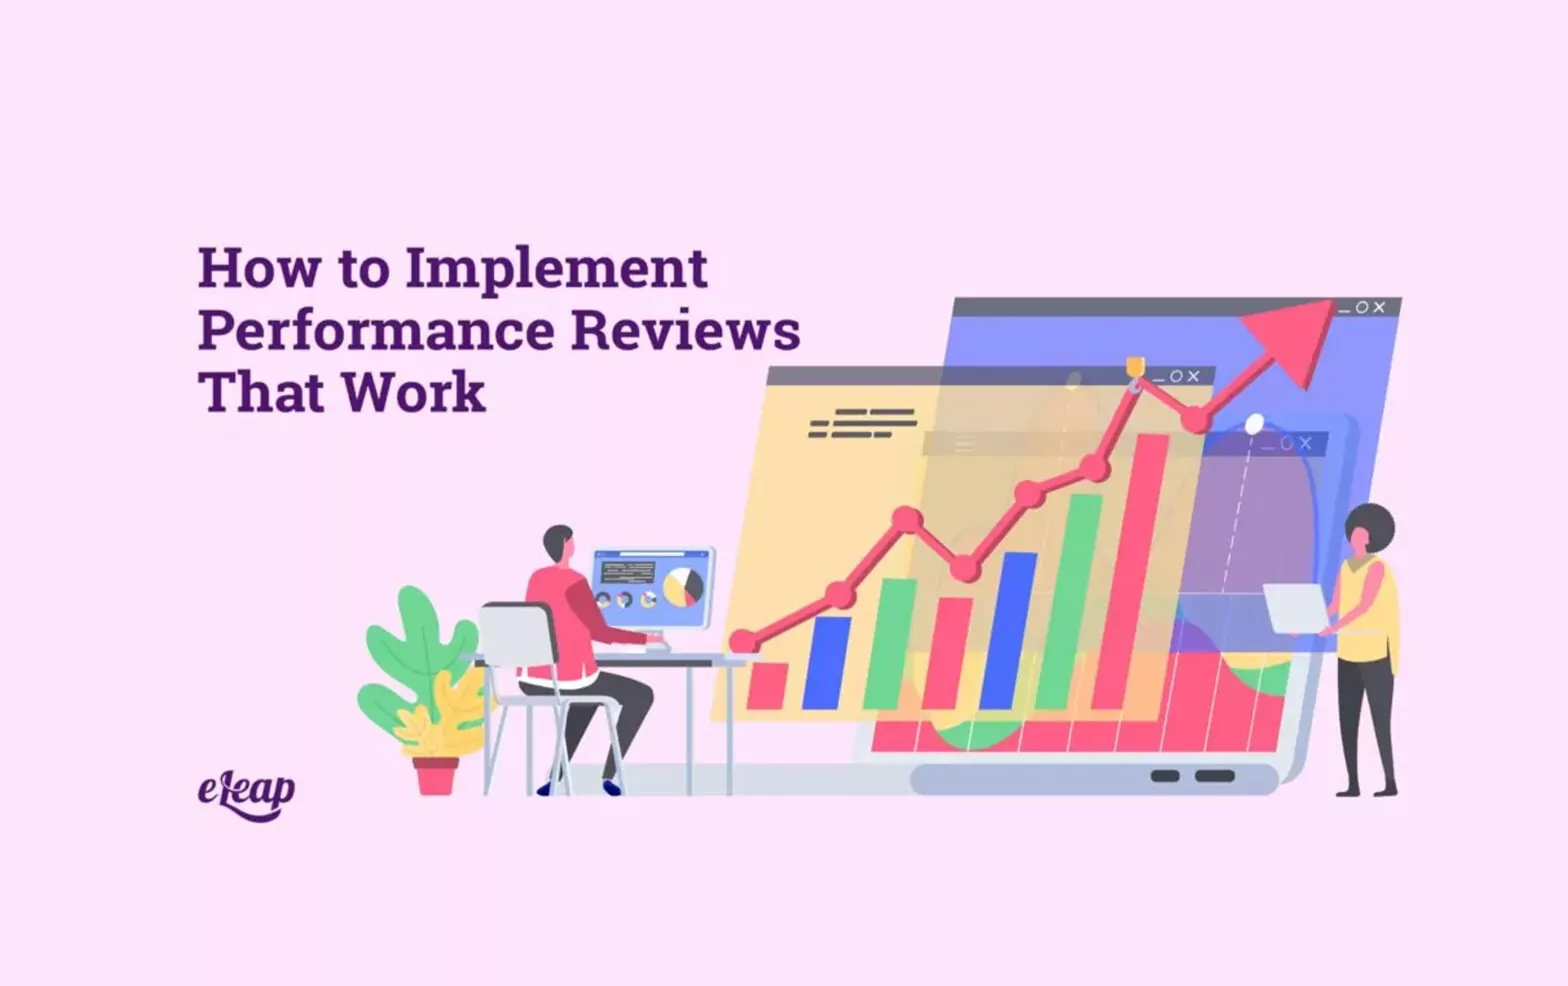 How to Implement Performance Reviews That Work